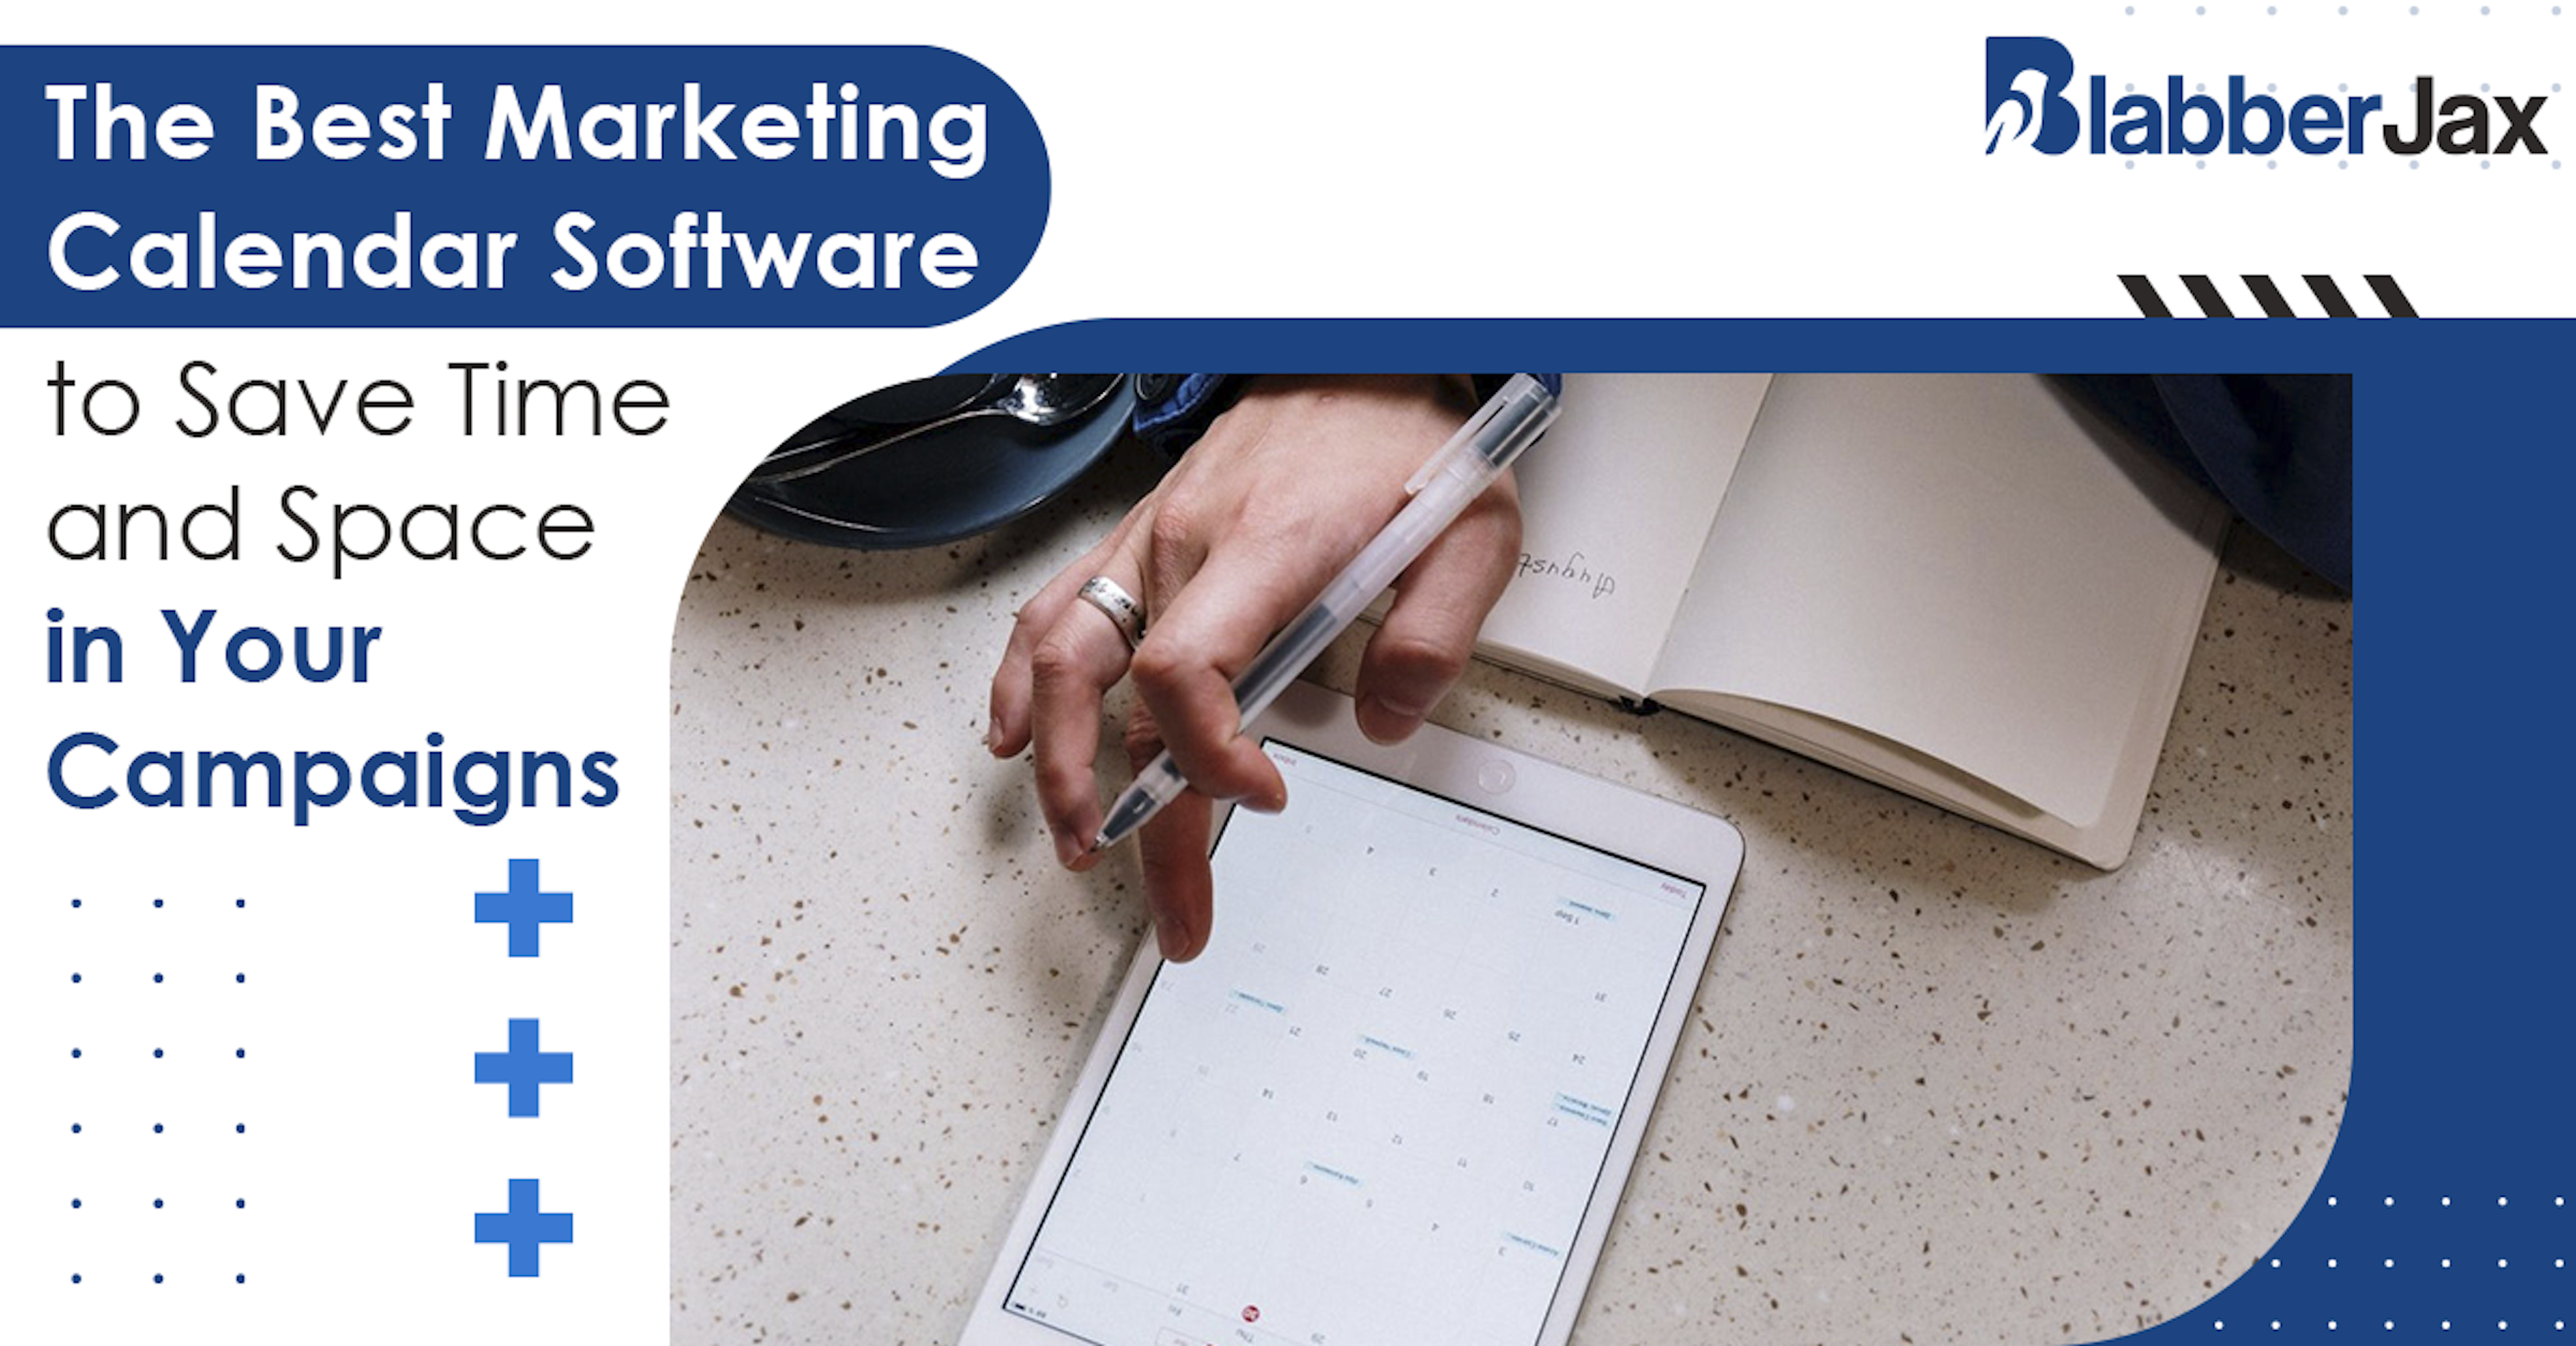 The Best Marketing Calendar Software to Save Time and Space in Your Campaigns